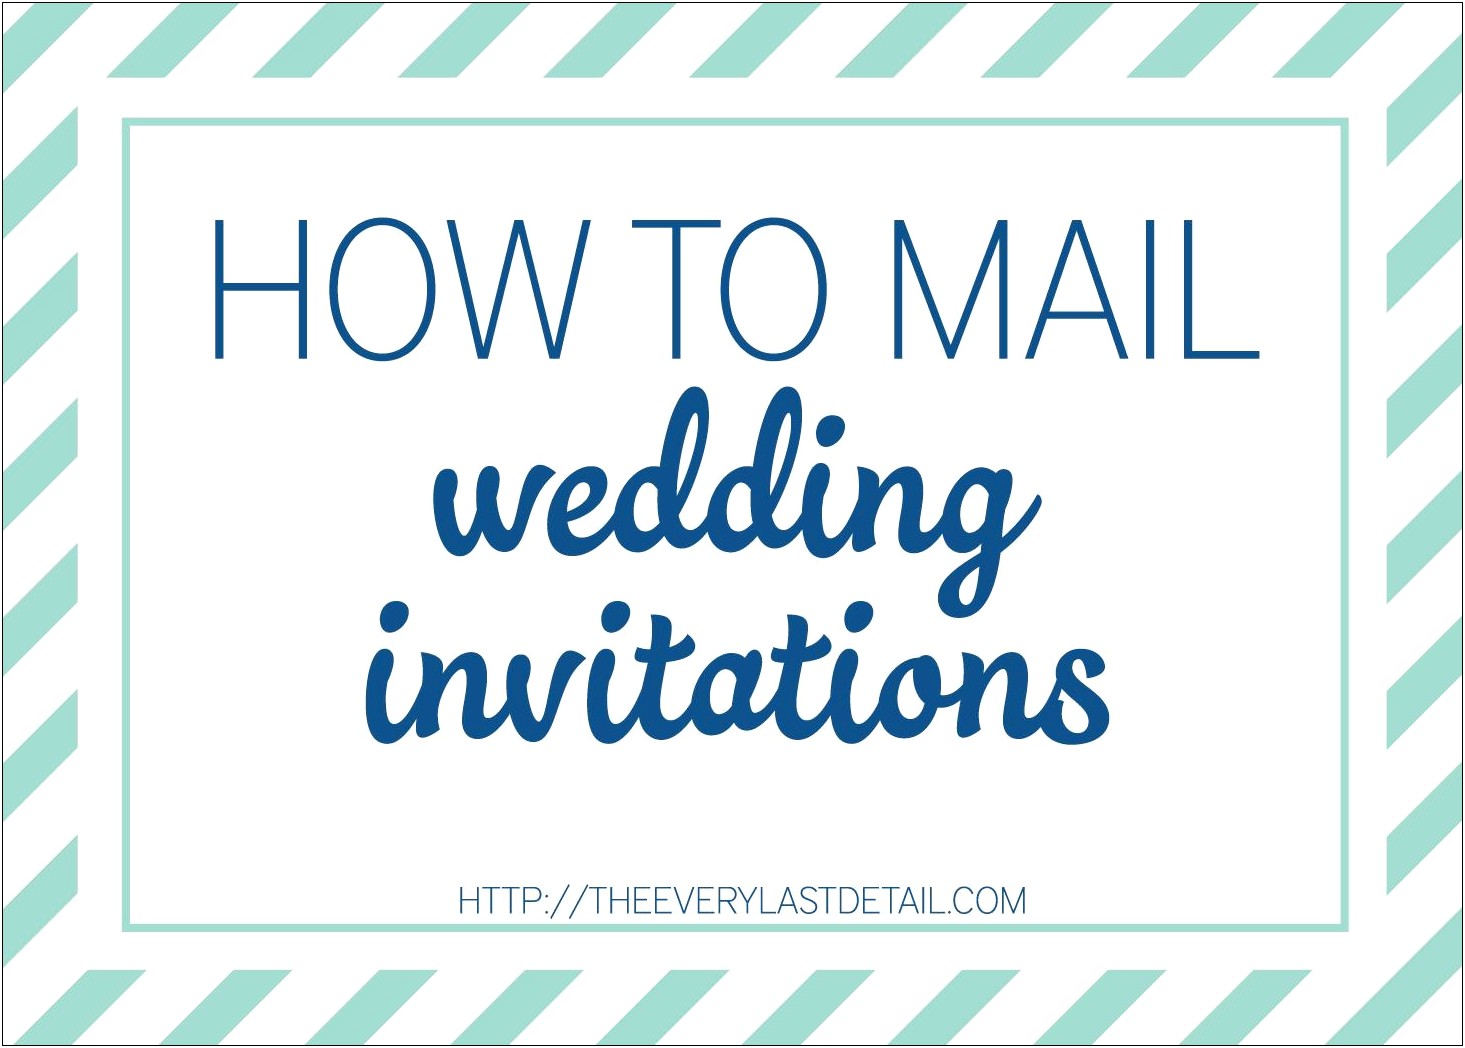 Invitation Through Email For A Wedding